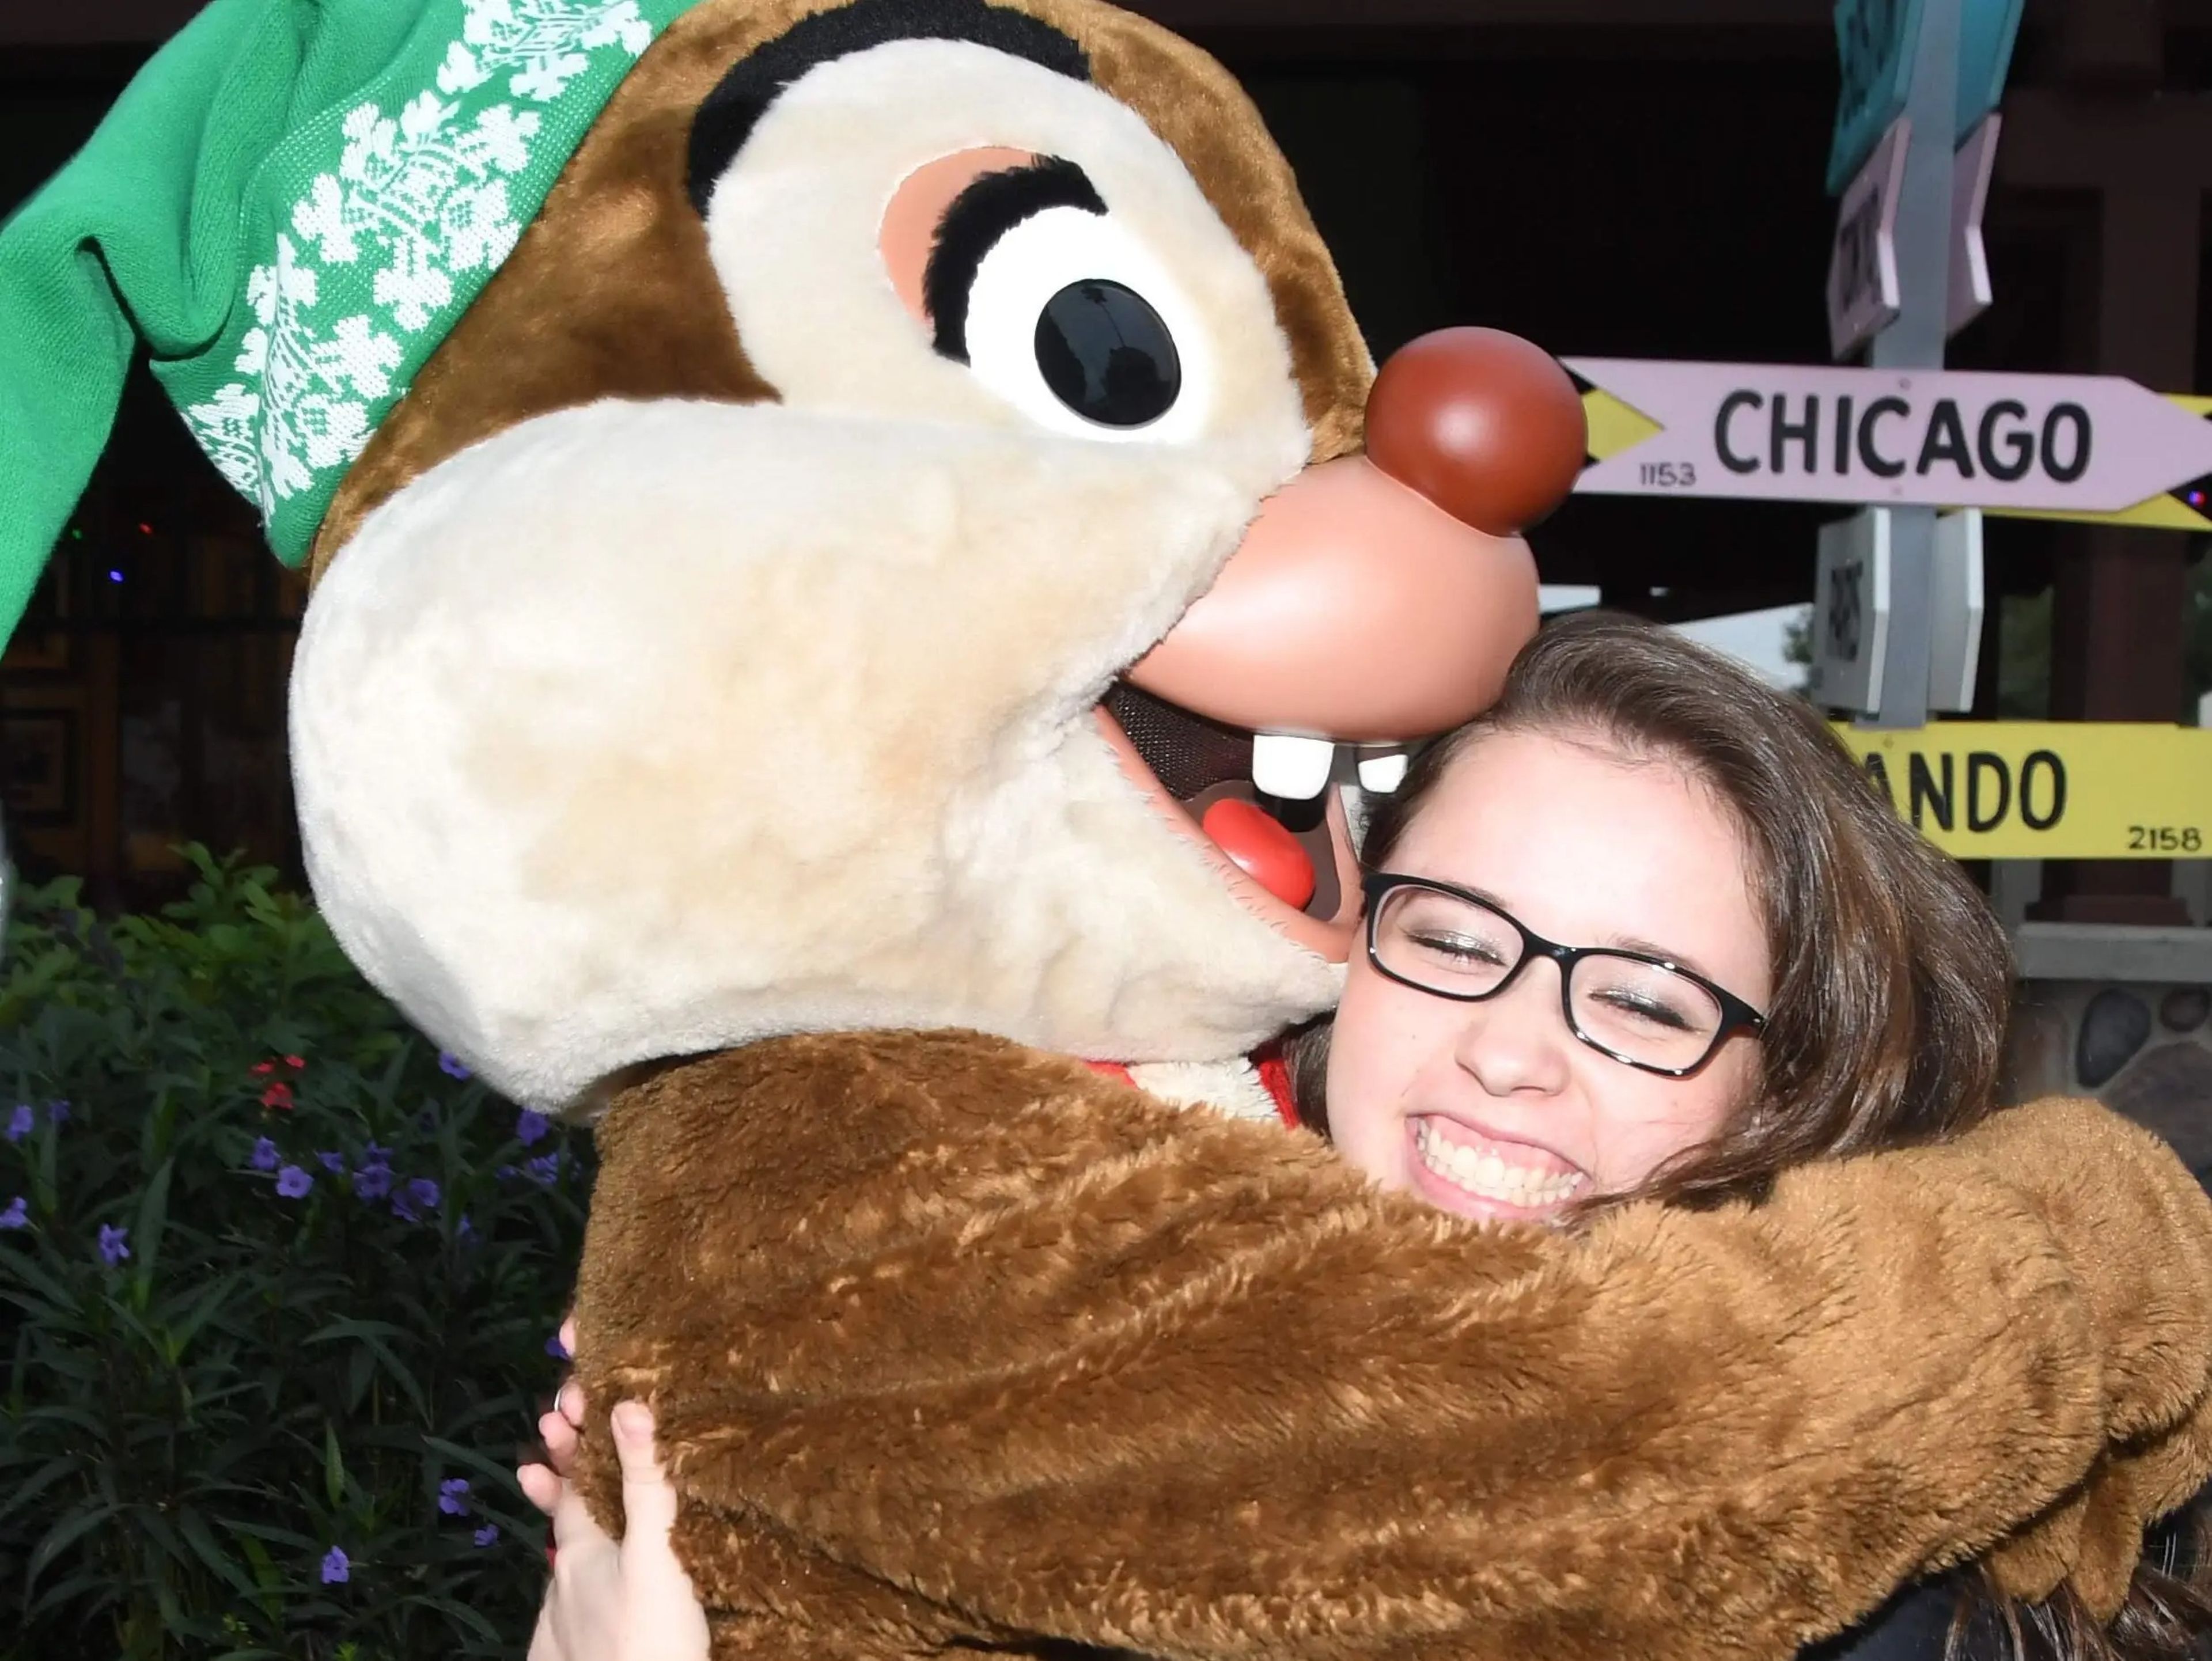 sofia posing for a photo hugging dale at hollywood studios in disney world